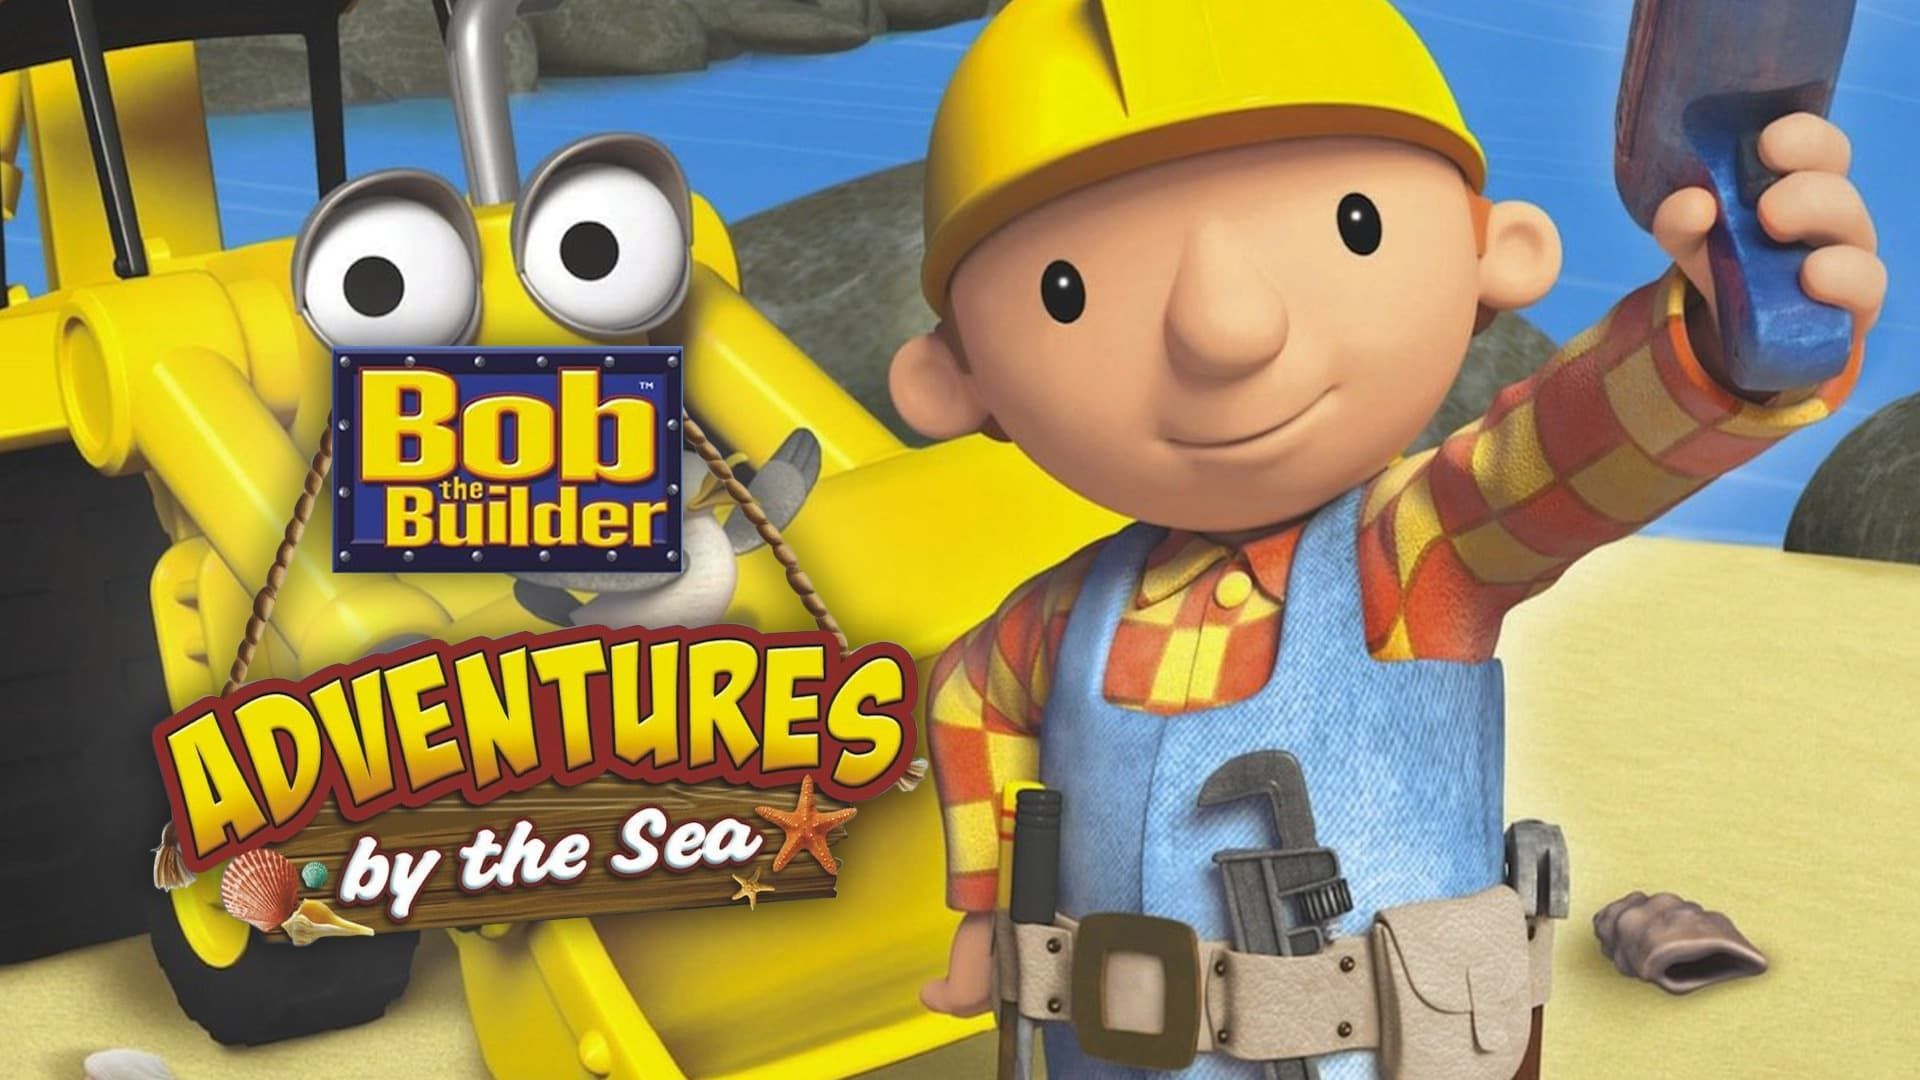 Bob the Builder: Adventures by the Sea background